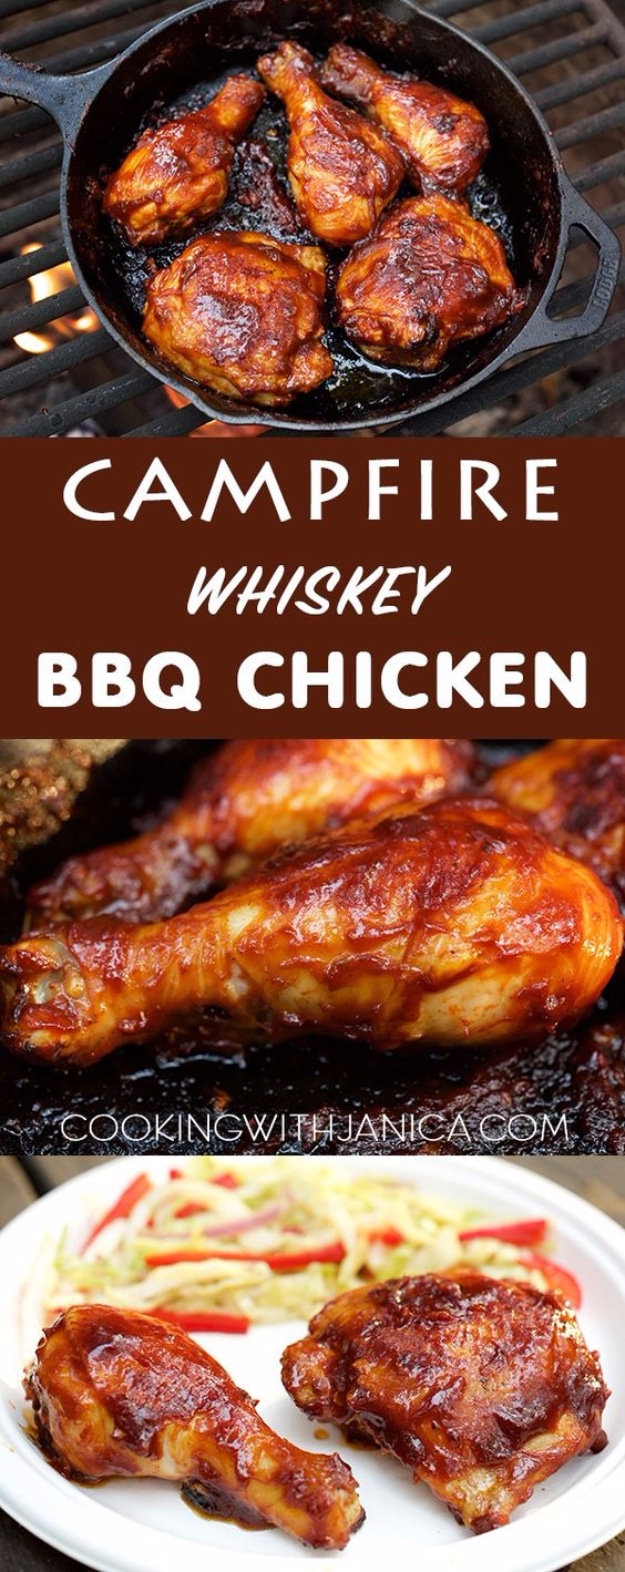 Best Recipes for a Backyard Barbecue - Campfire Whiskey BBQ Chicken - Best Cheap, Easy and Quick Recipes Ideas for Awesome Cookouts. Outdoor BBQ and Party Foods You Can Make for A Crowd 